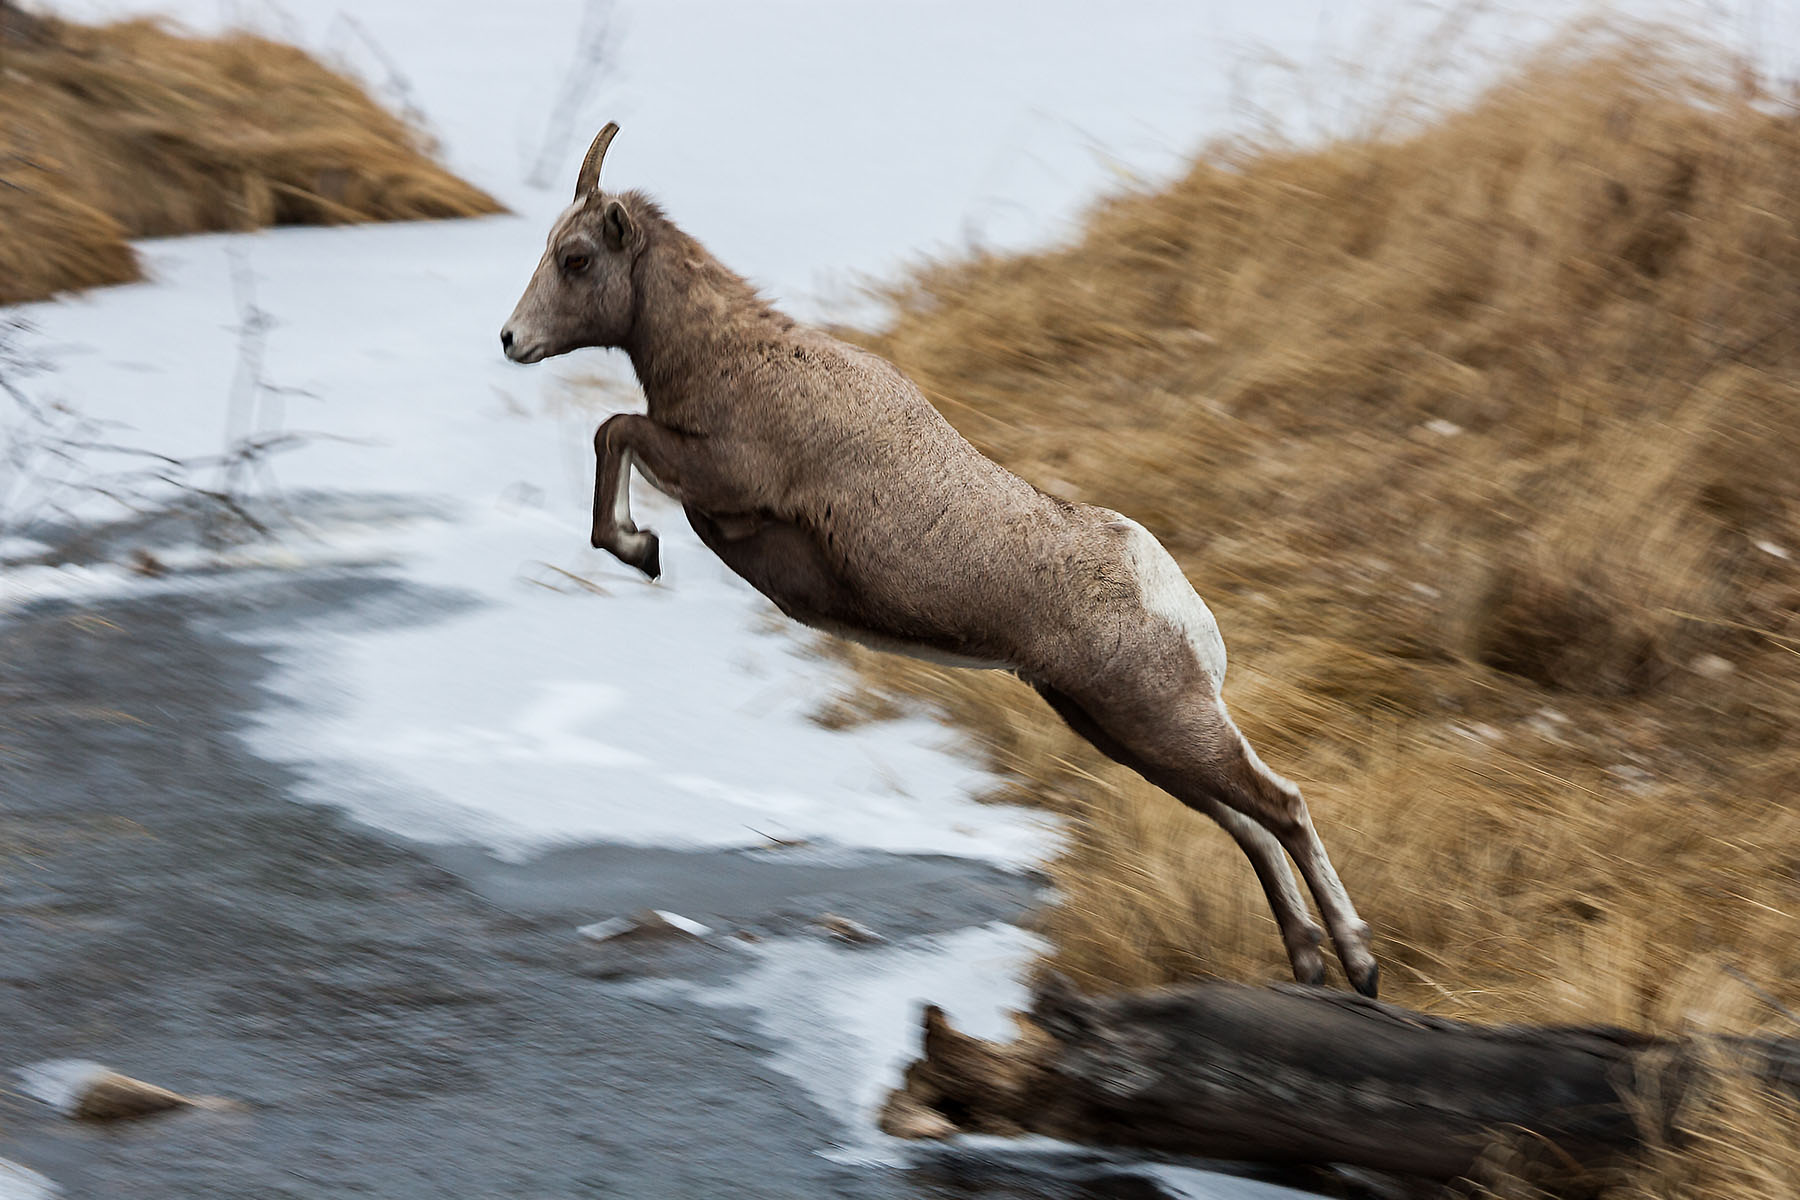 Rocky Mountain Bighorn ewe leaping a creek, Custer State Park.  Click for next photo.